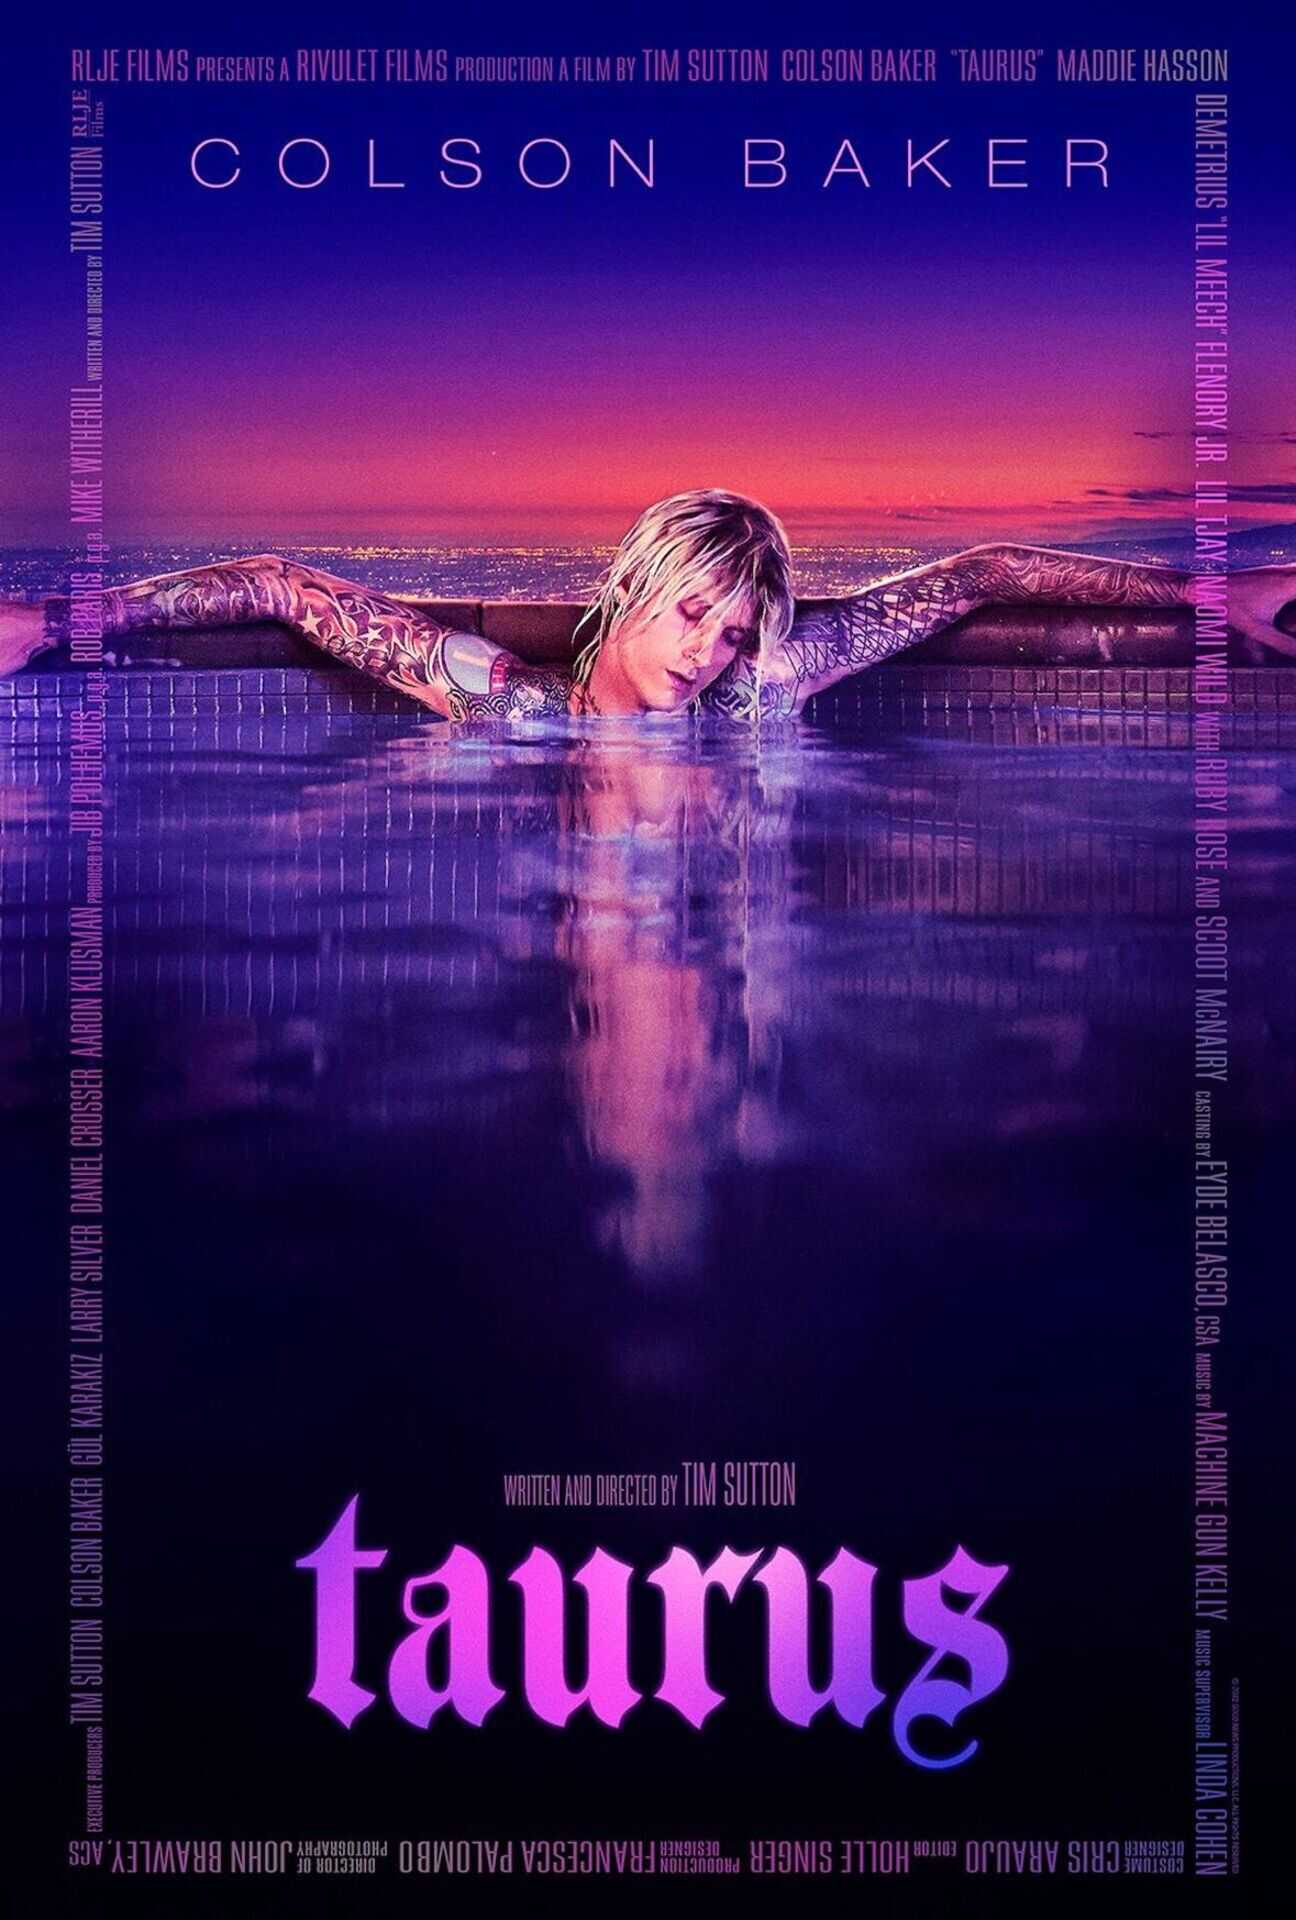 Theatrical poster for Taurus. Courtesy of RLJE Films.